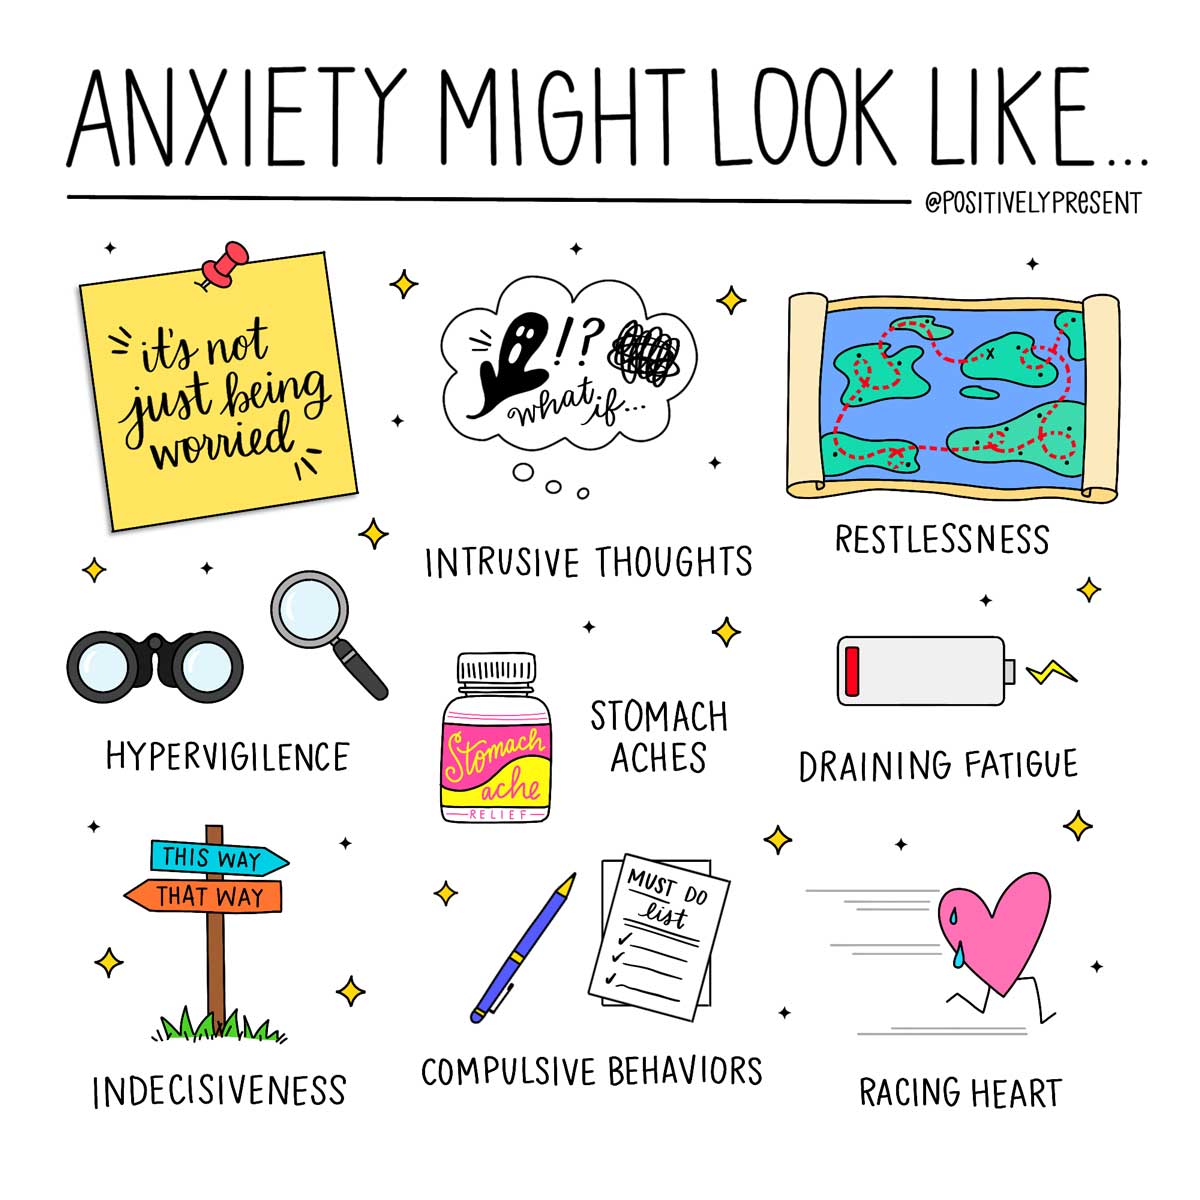 drawings of more things anxiety might look like, such as restlessness and fatigue.